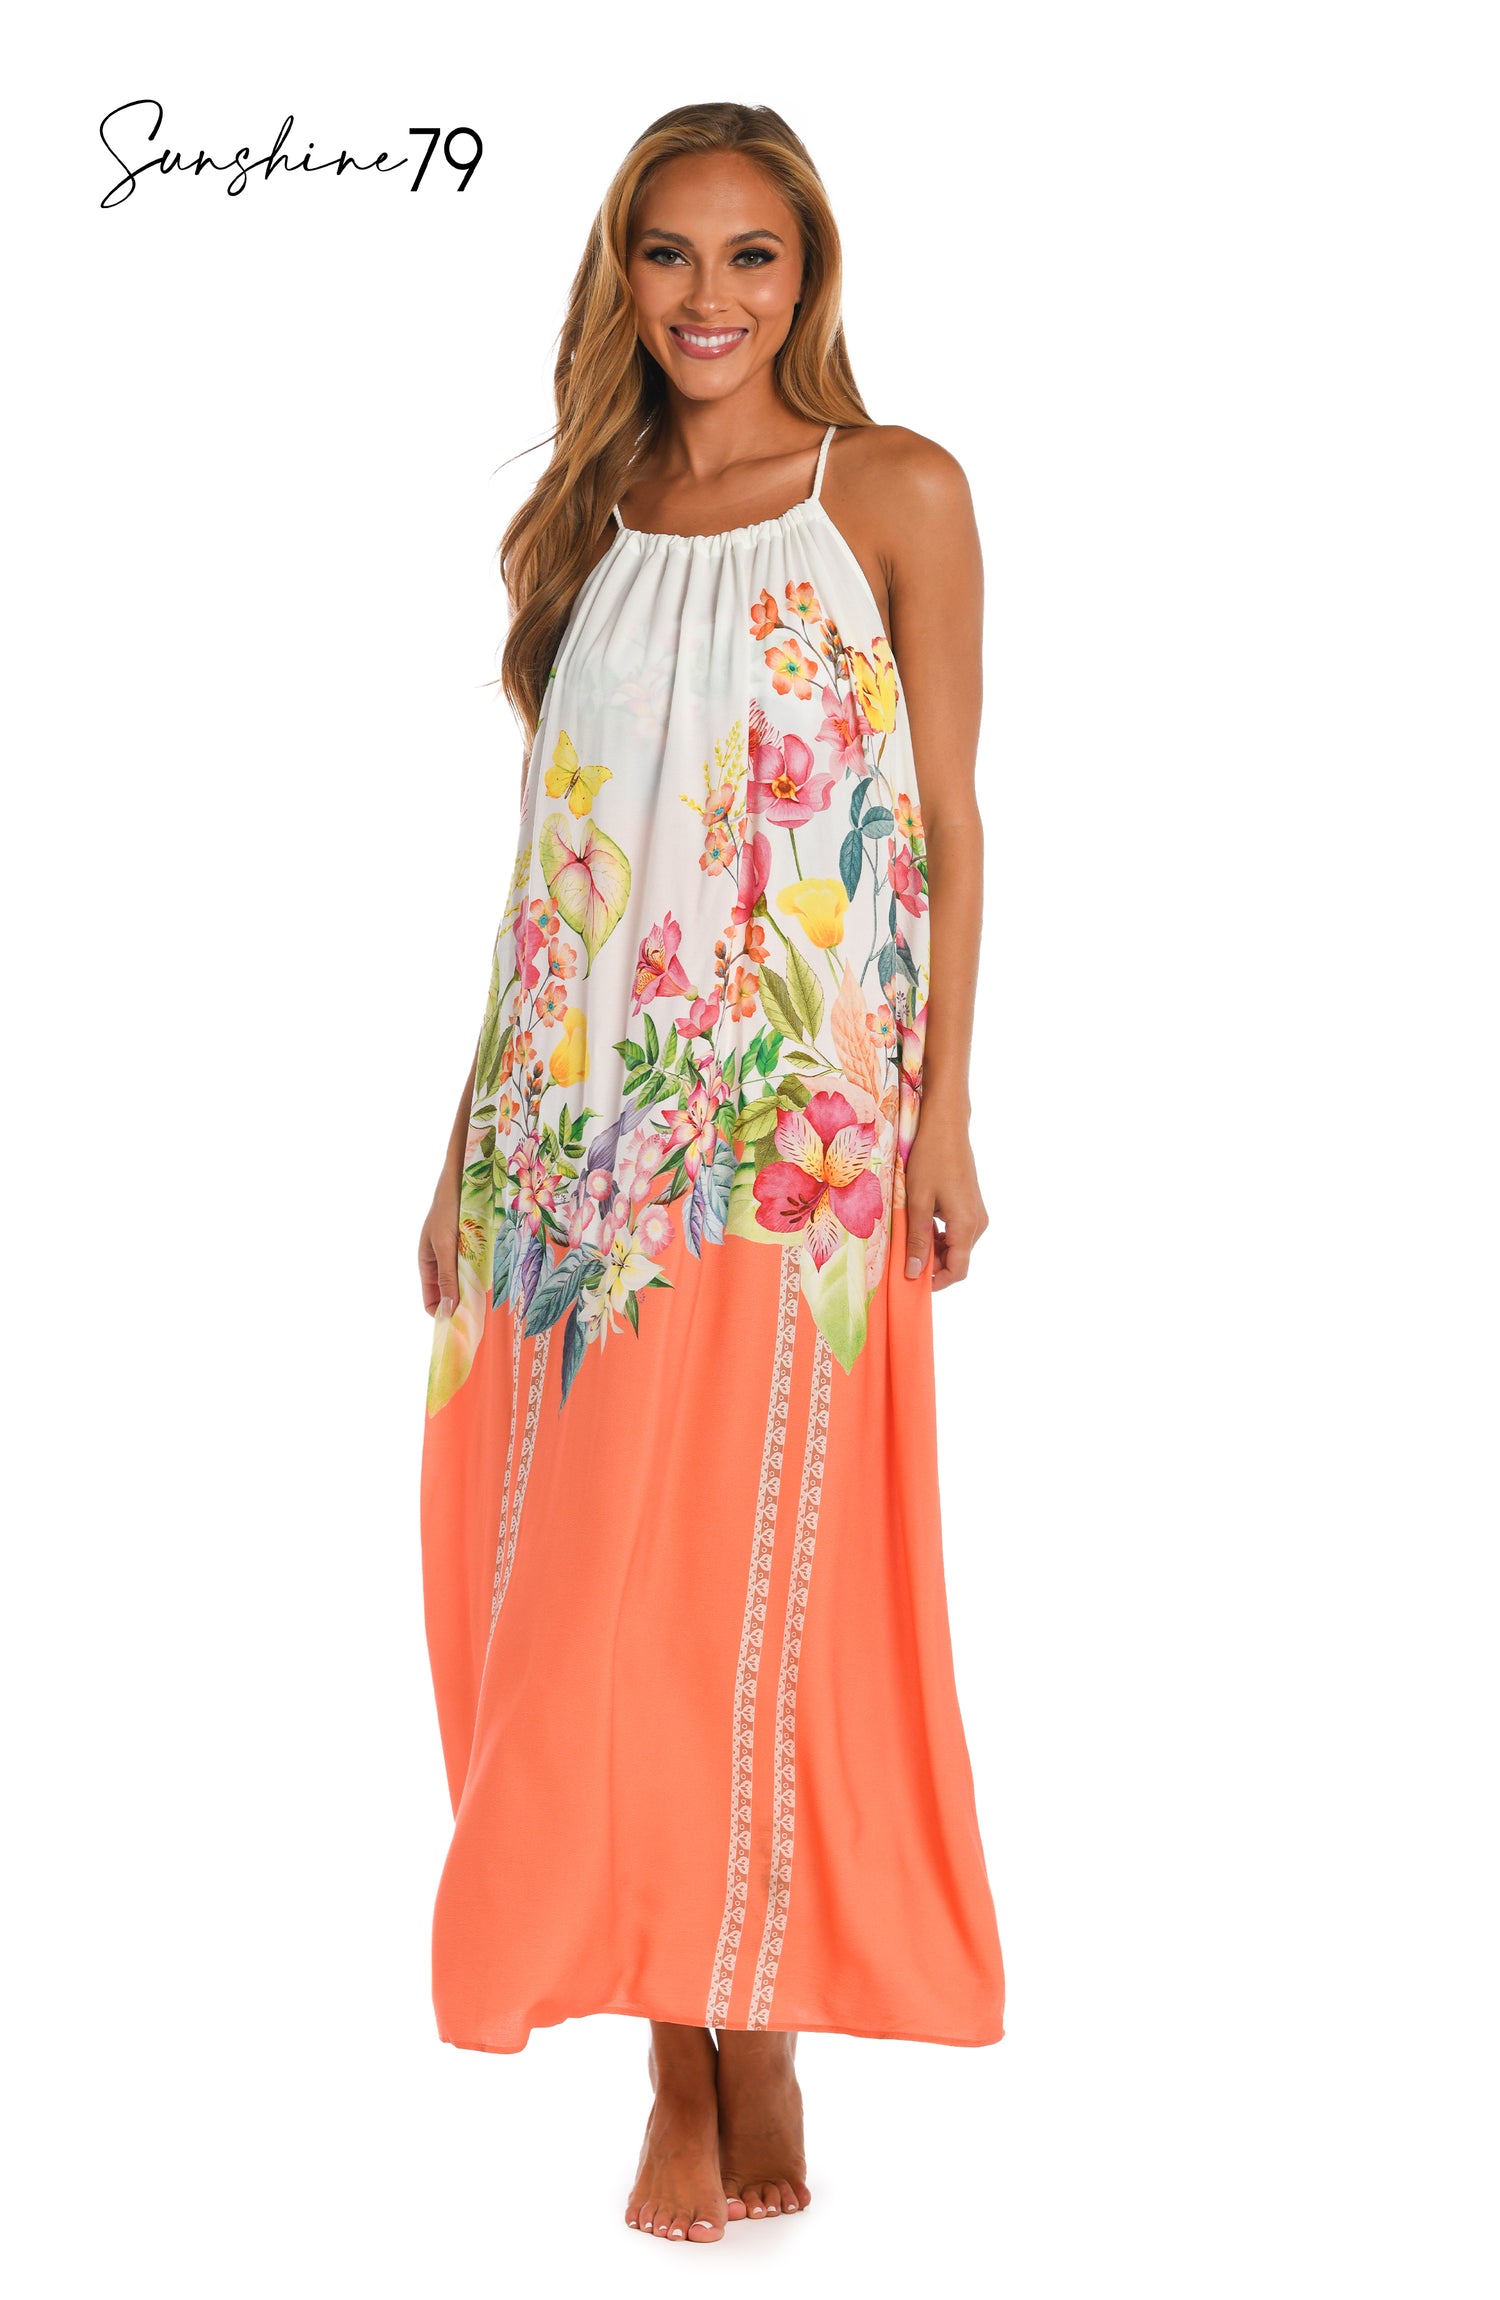 Model is wearing a coral multicolored floral printed halter maxi dress cover up from our Sunshine 79 brand.